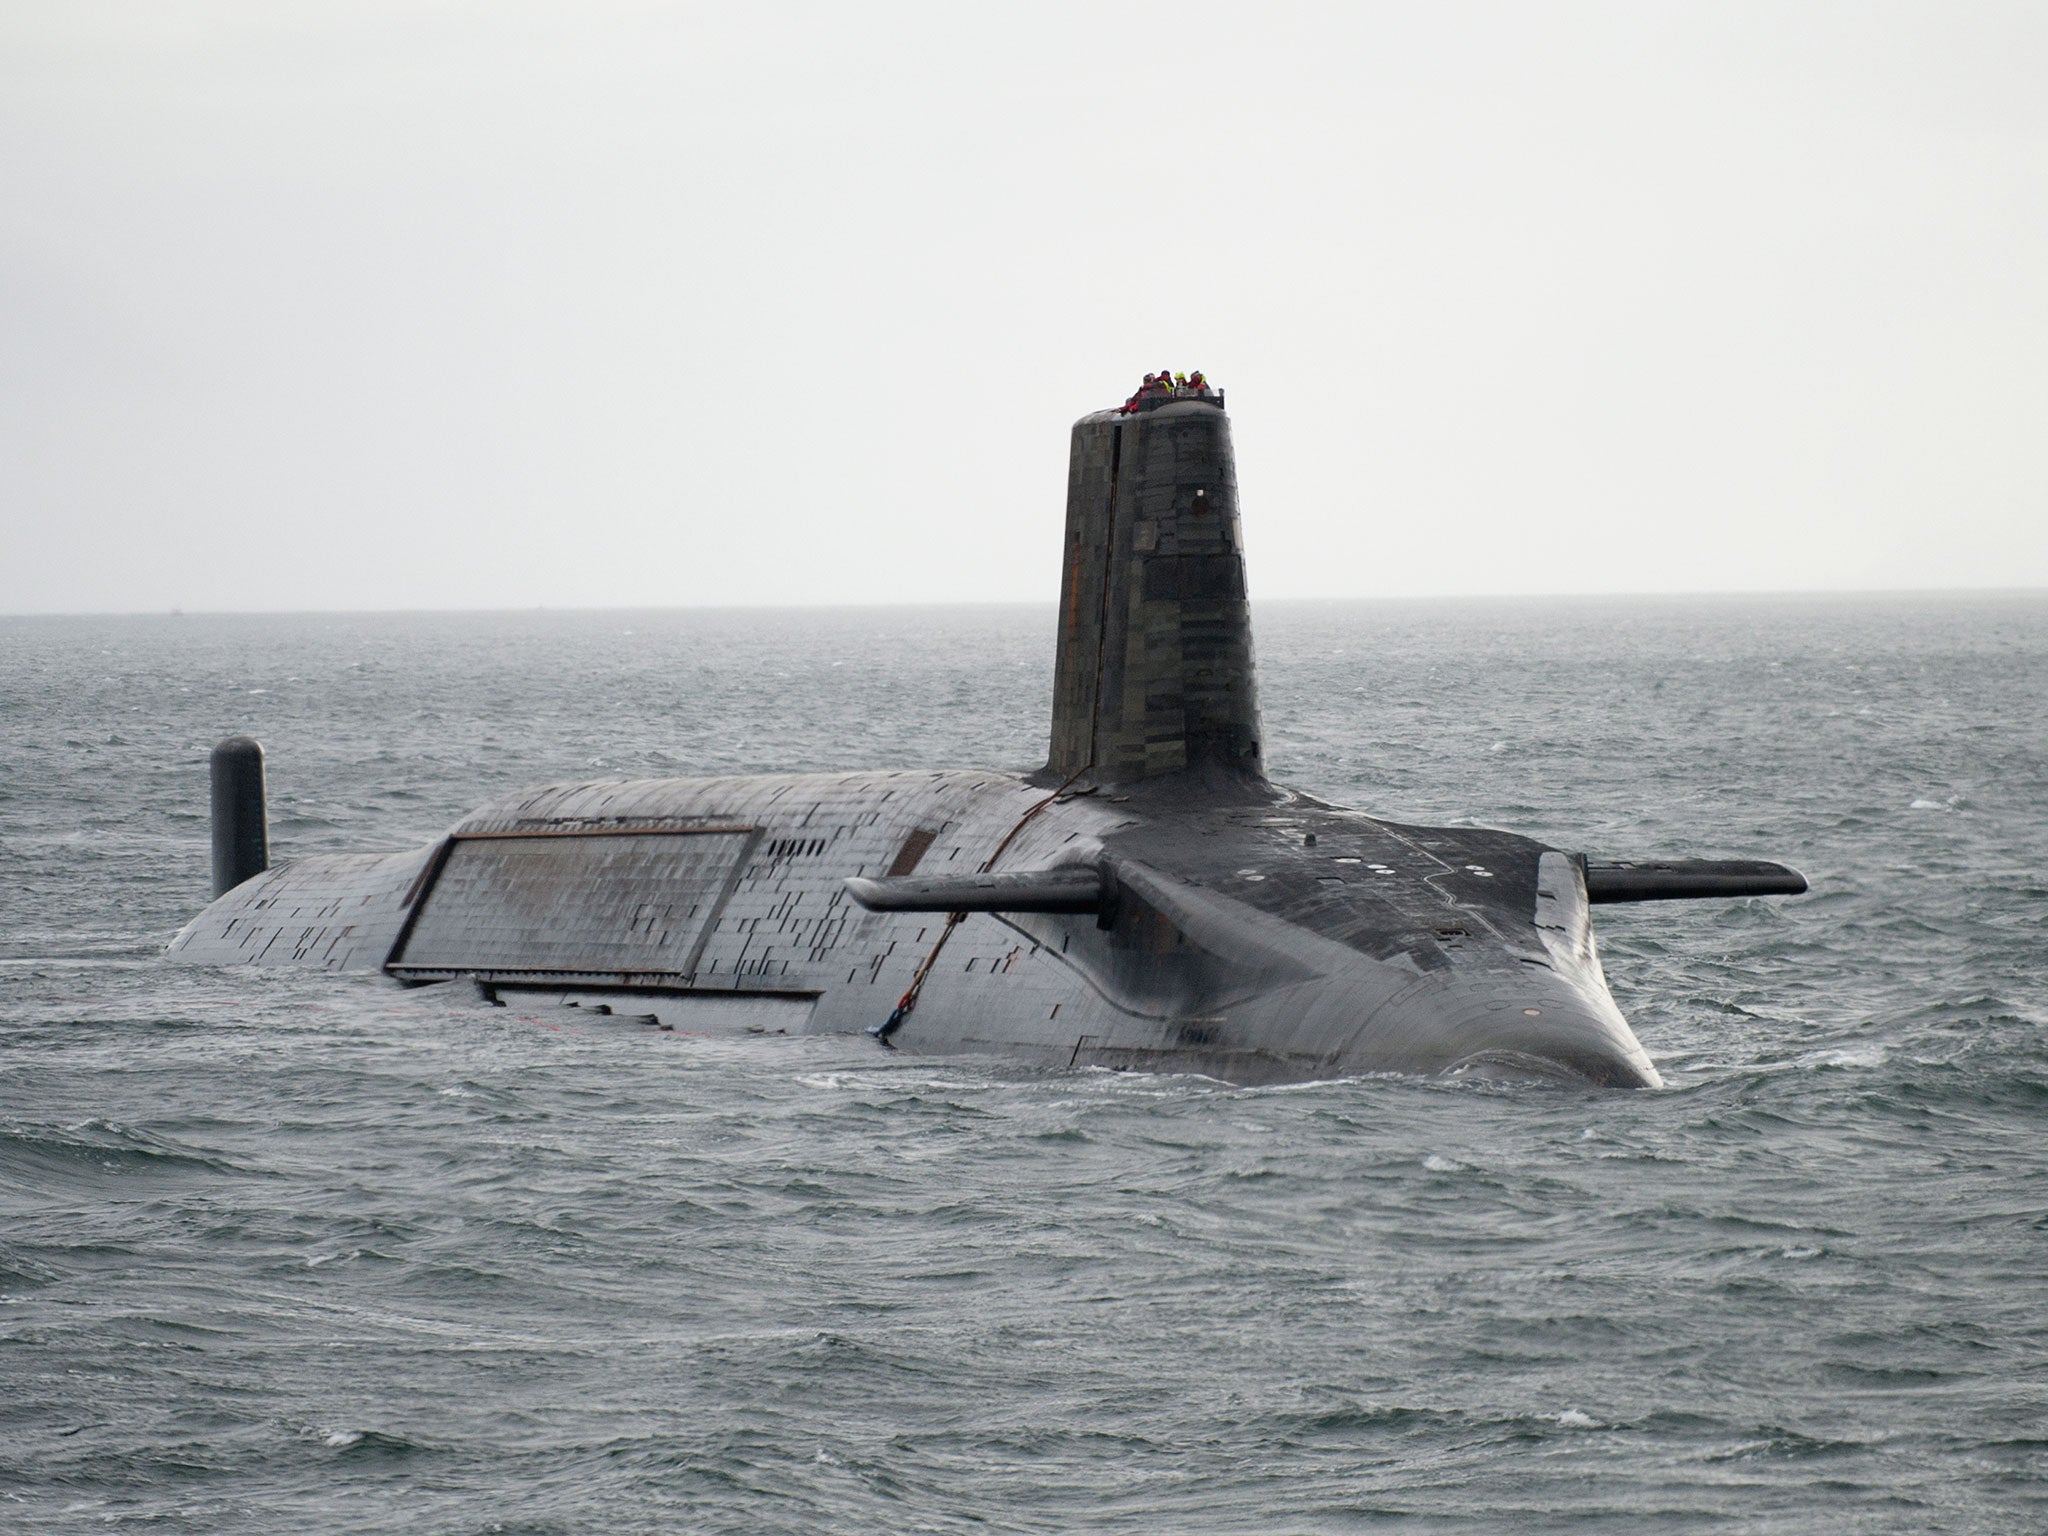 Estimates for how much Trident will cost continue to rise